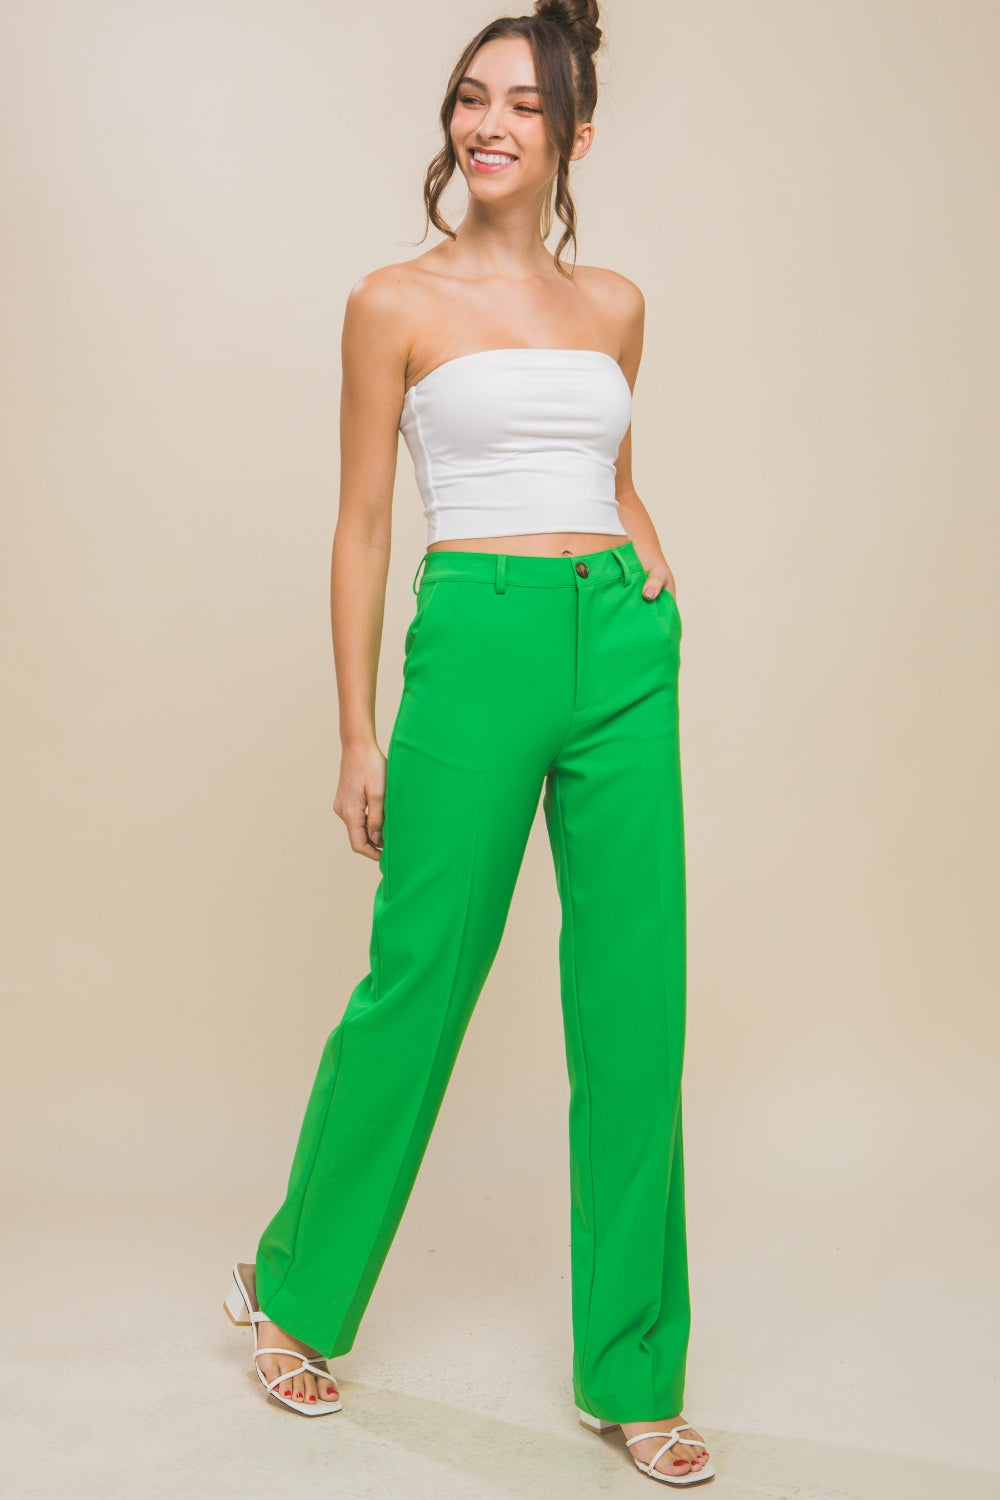 Embrace elegance with Love Tree's High Waist Straight Pants, perfect for versatile styling and a flattering fit. Shop the bold look!